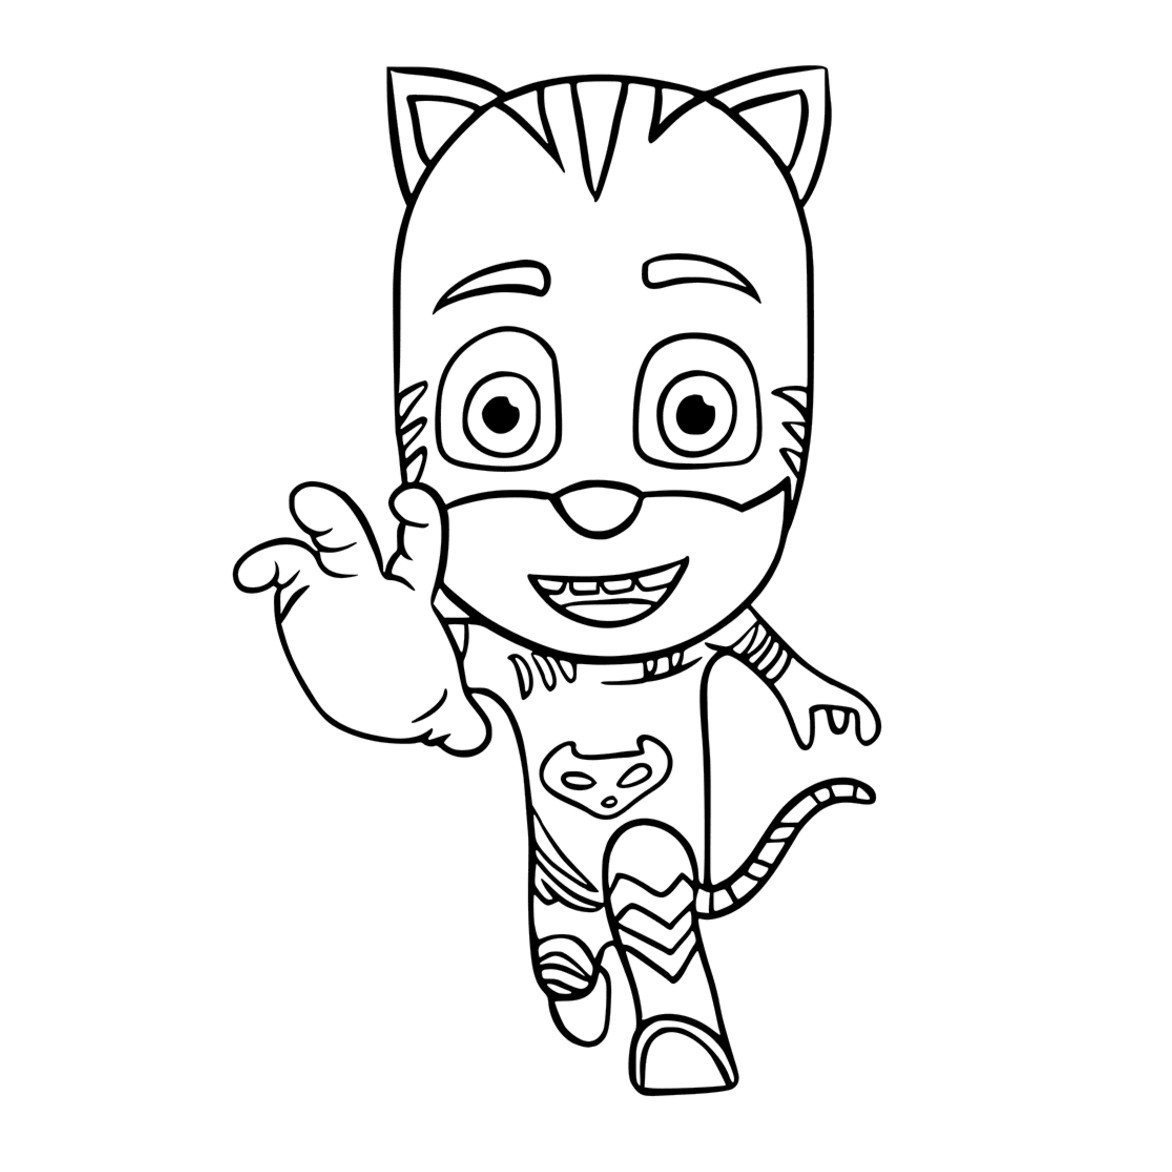 Printable Pj Mask Coloring Pages
 PJ Masks coloring pages to and print for free